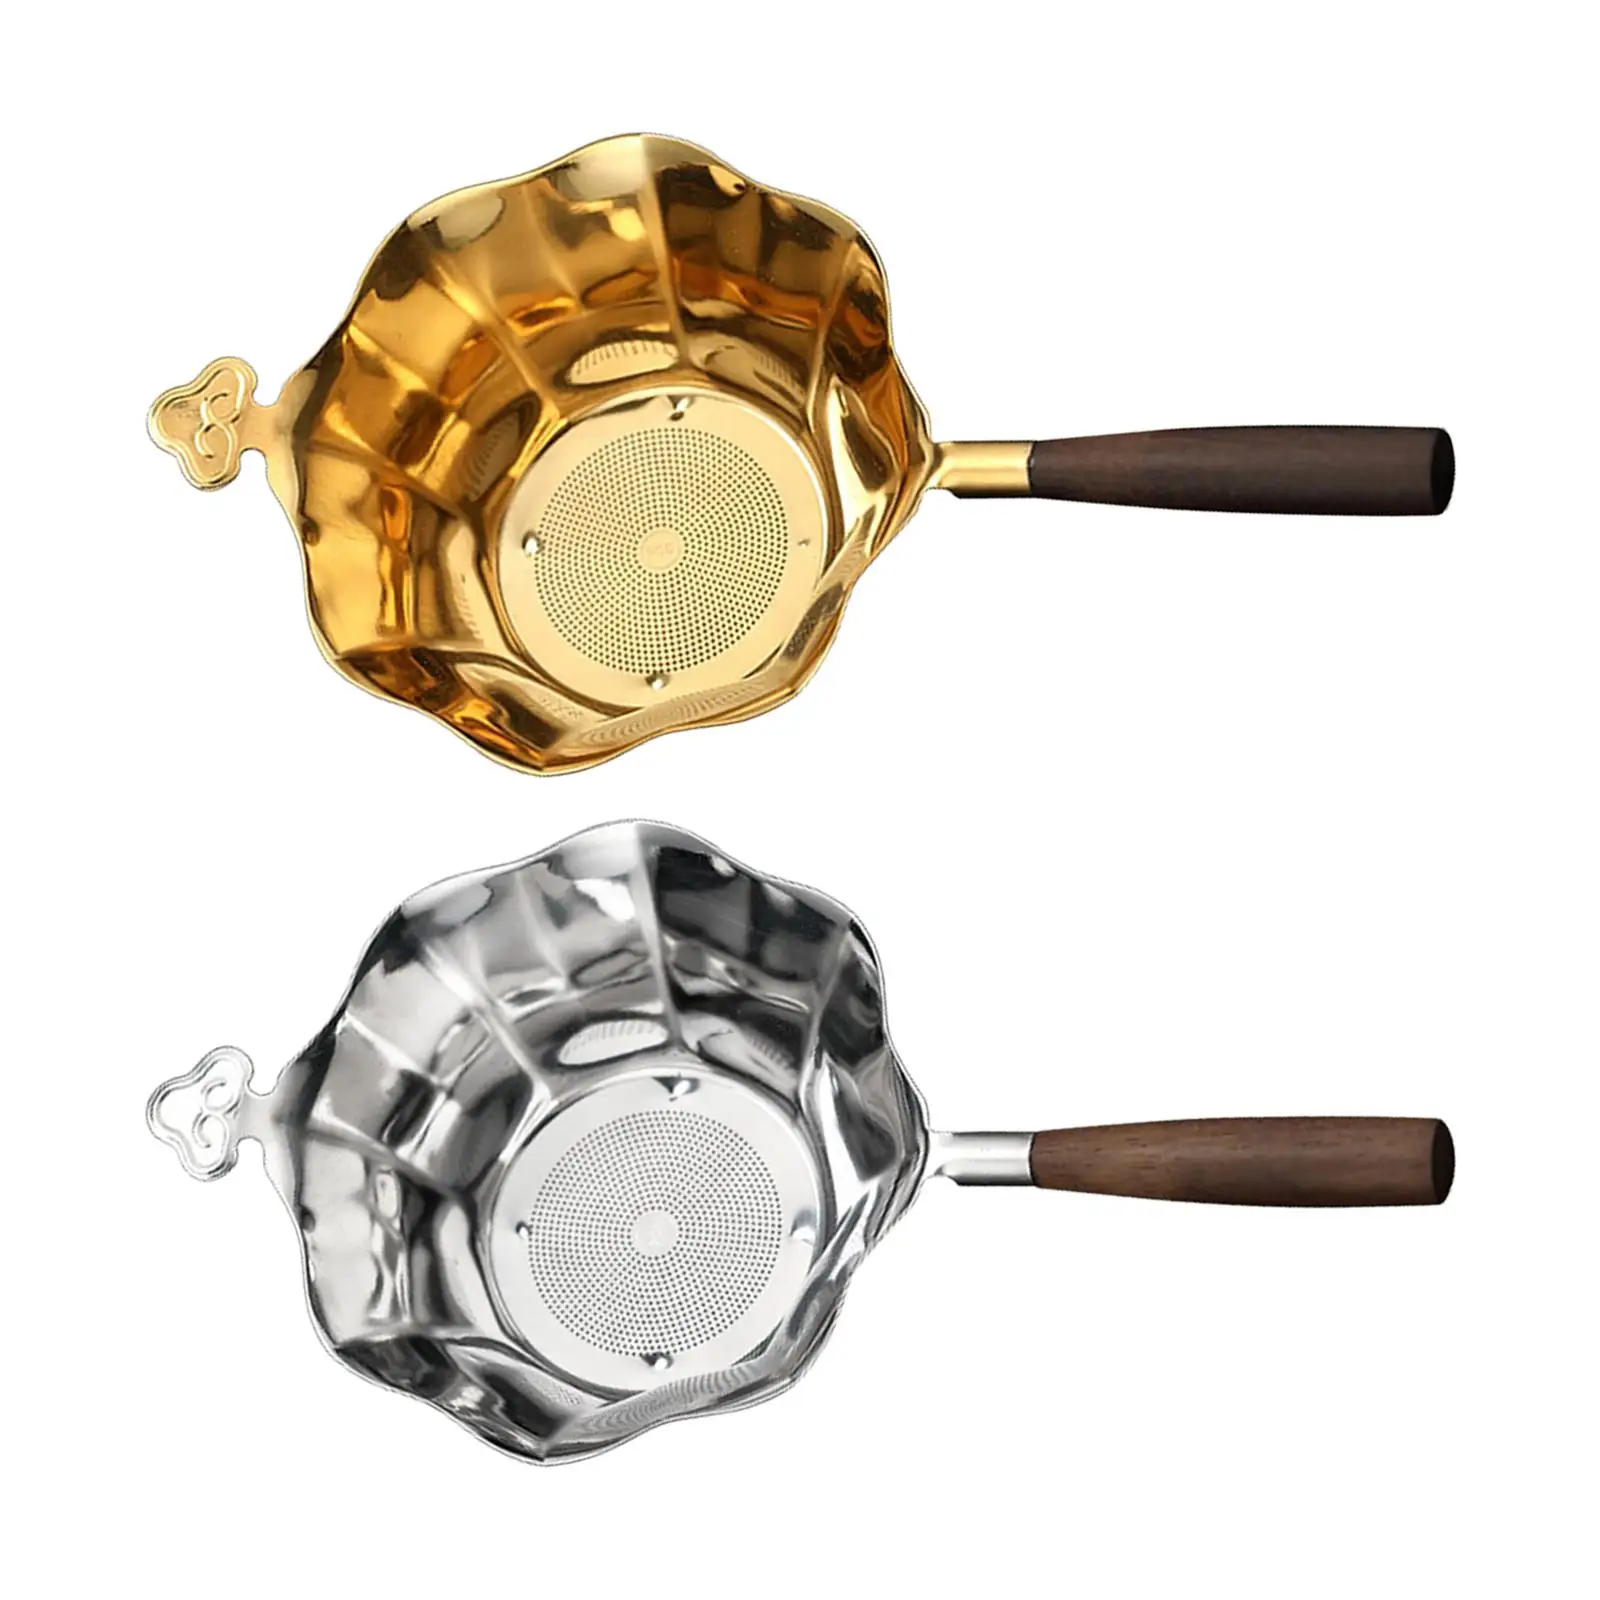 Wooden Handle Tea Strainer Portable Tea Infuser Stainless Steel Fine Mesh for Tea Room Commercial Use Household Home Kitchen